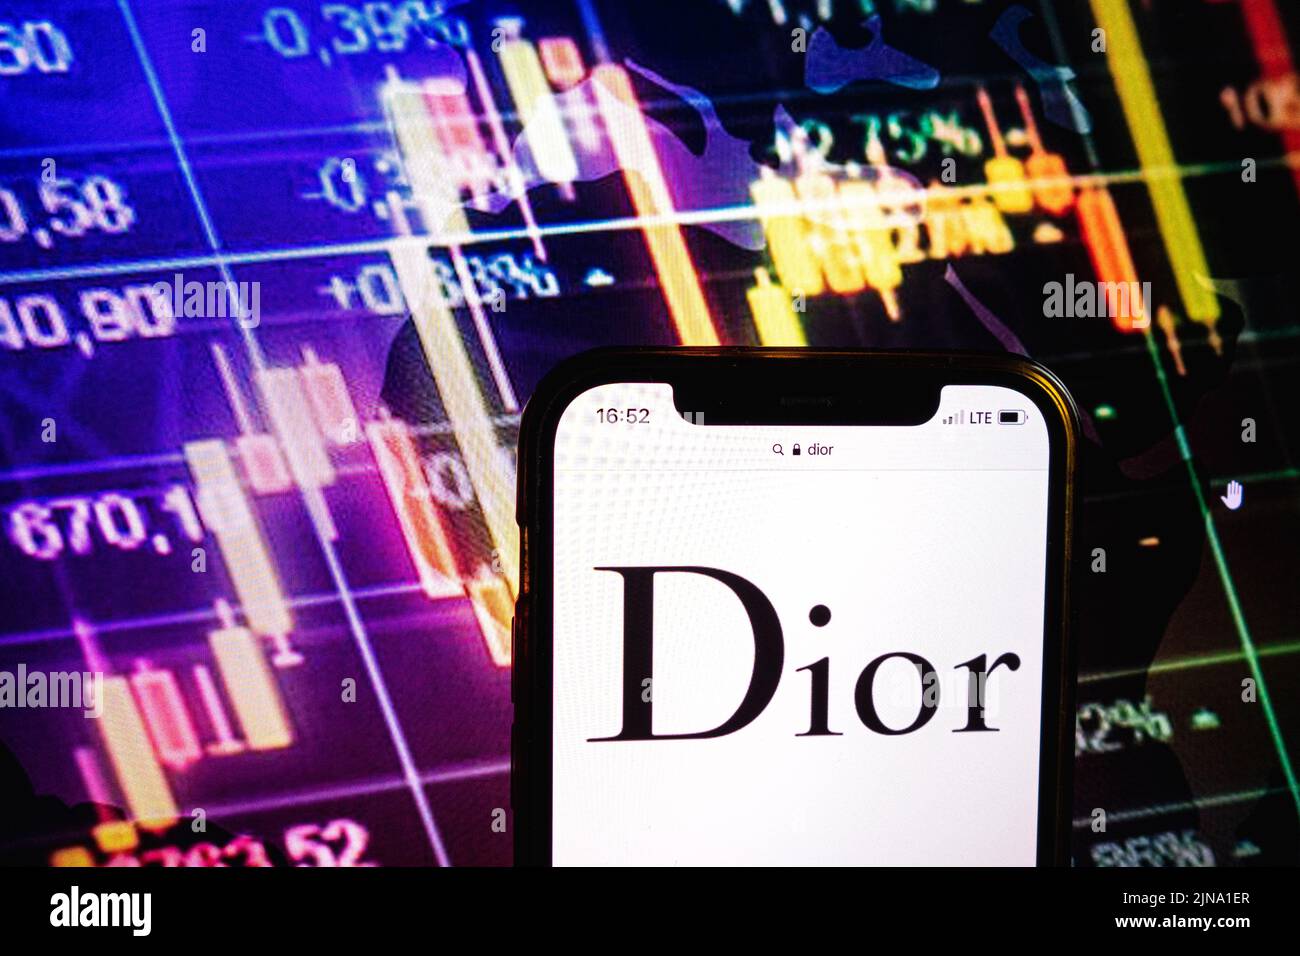 KONSKIE, POLAND - August 09, 2022: Smartphone displaying logo of Dior company on stock exchange diagram background Stock Photo